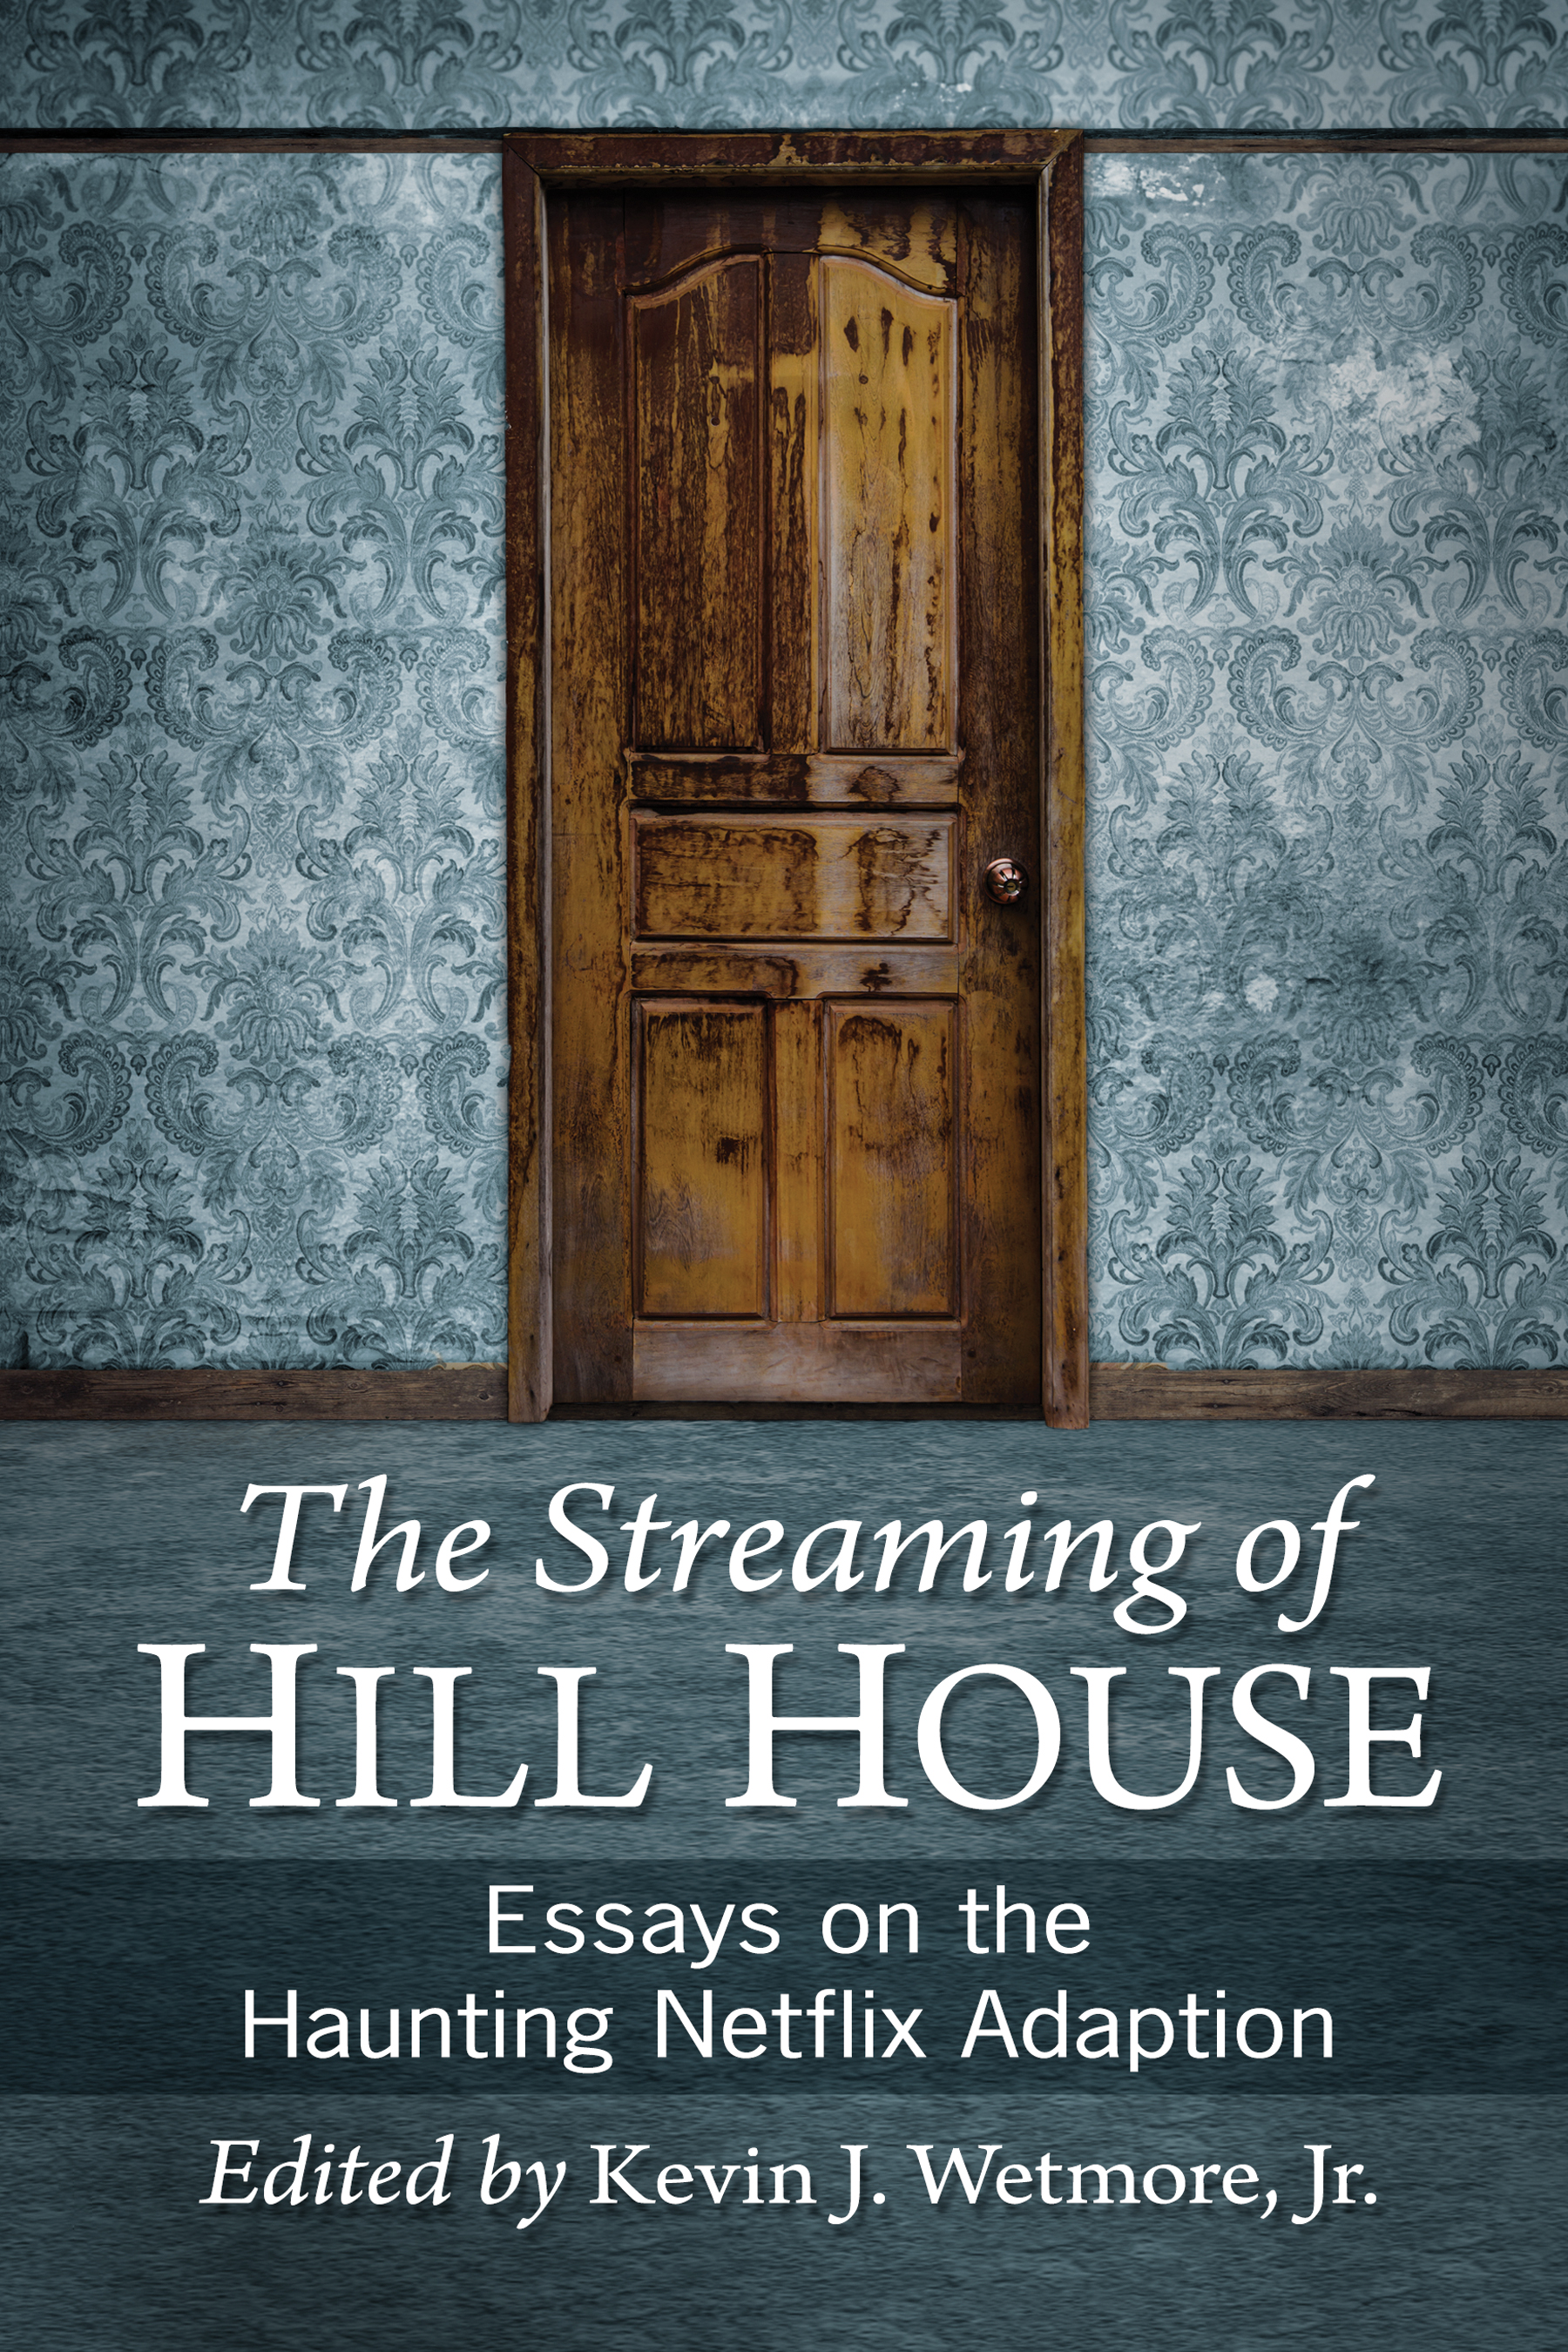 The Streaming of Hill House - 15-24.99